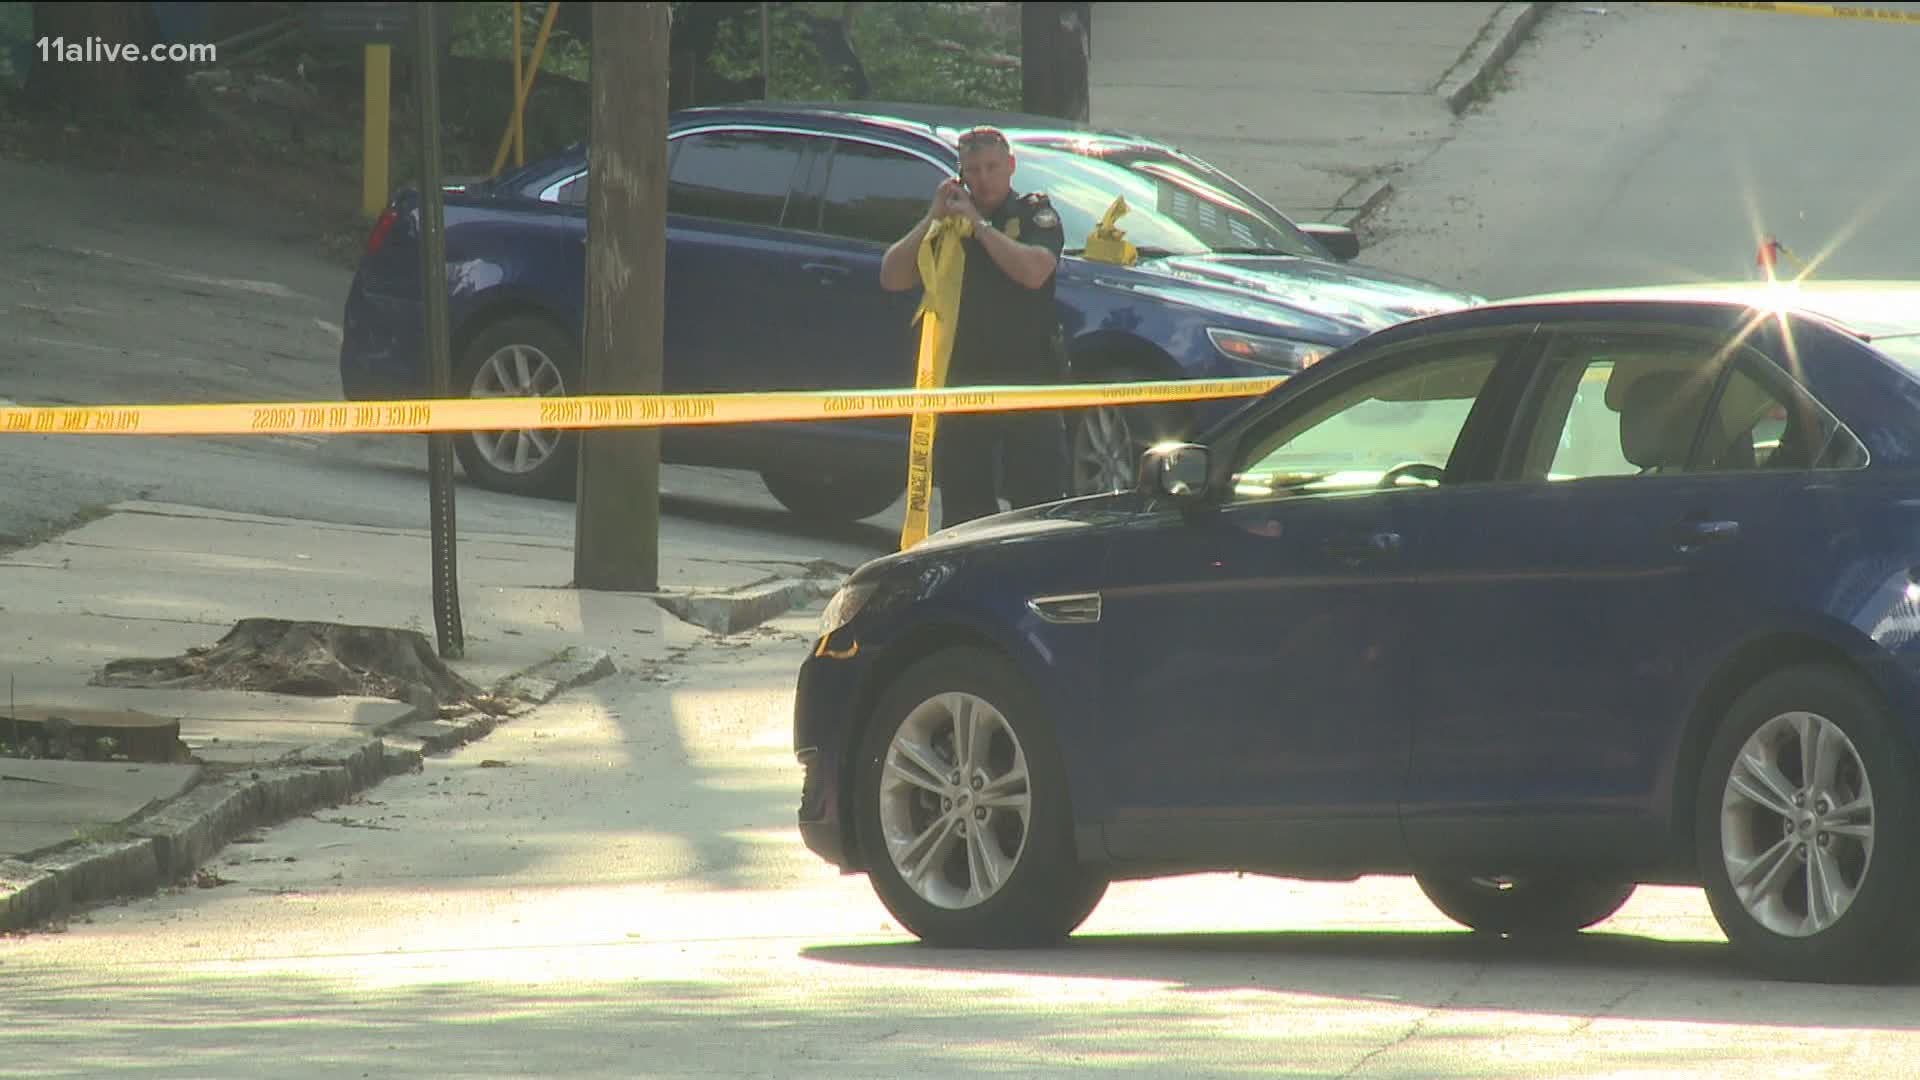 The gunfire happened in the heart of one of Atlanta's busiest districts after a suspect allegedly tried to hit police with a car.